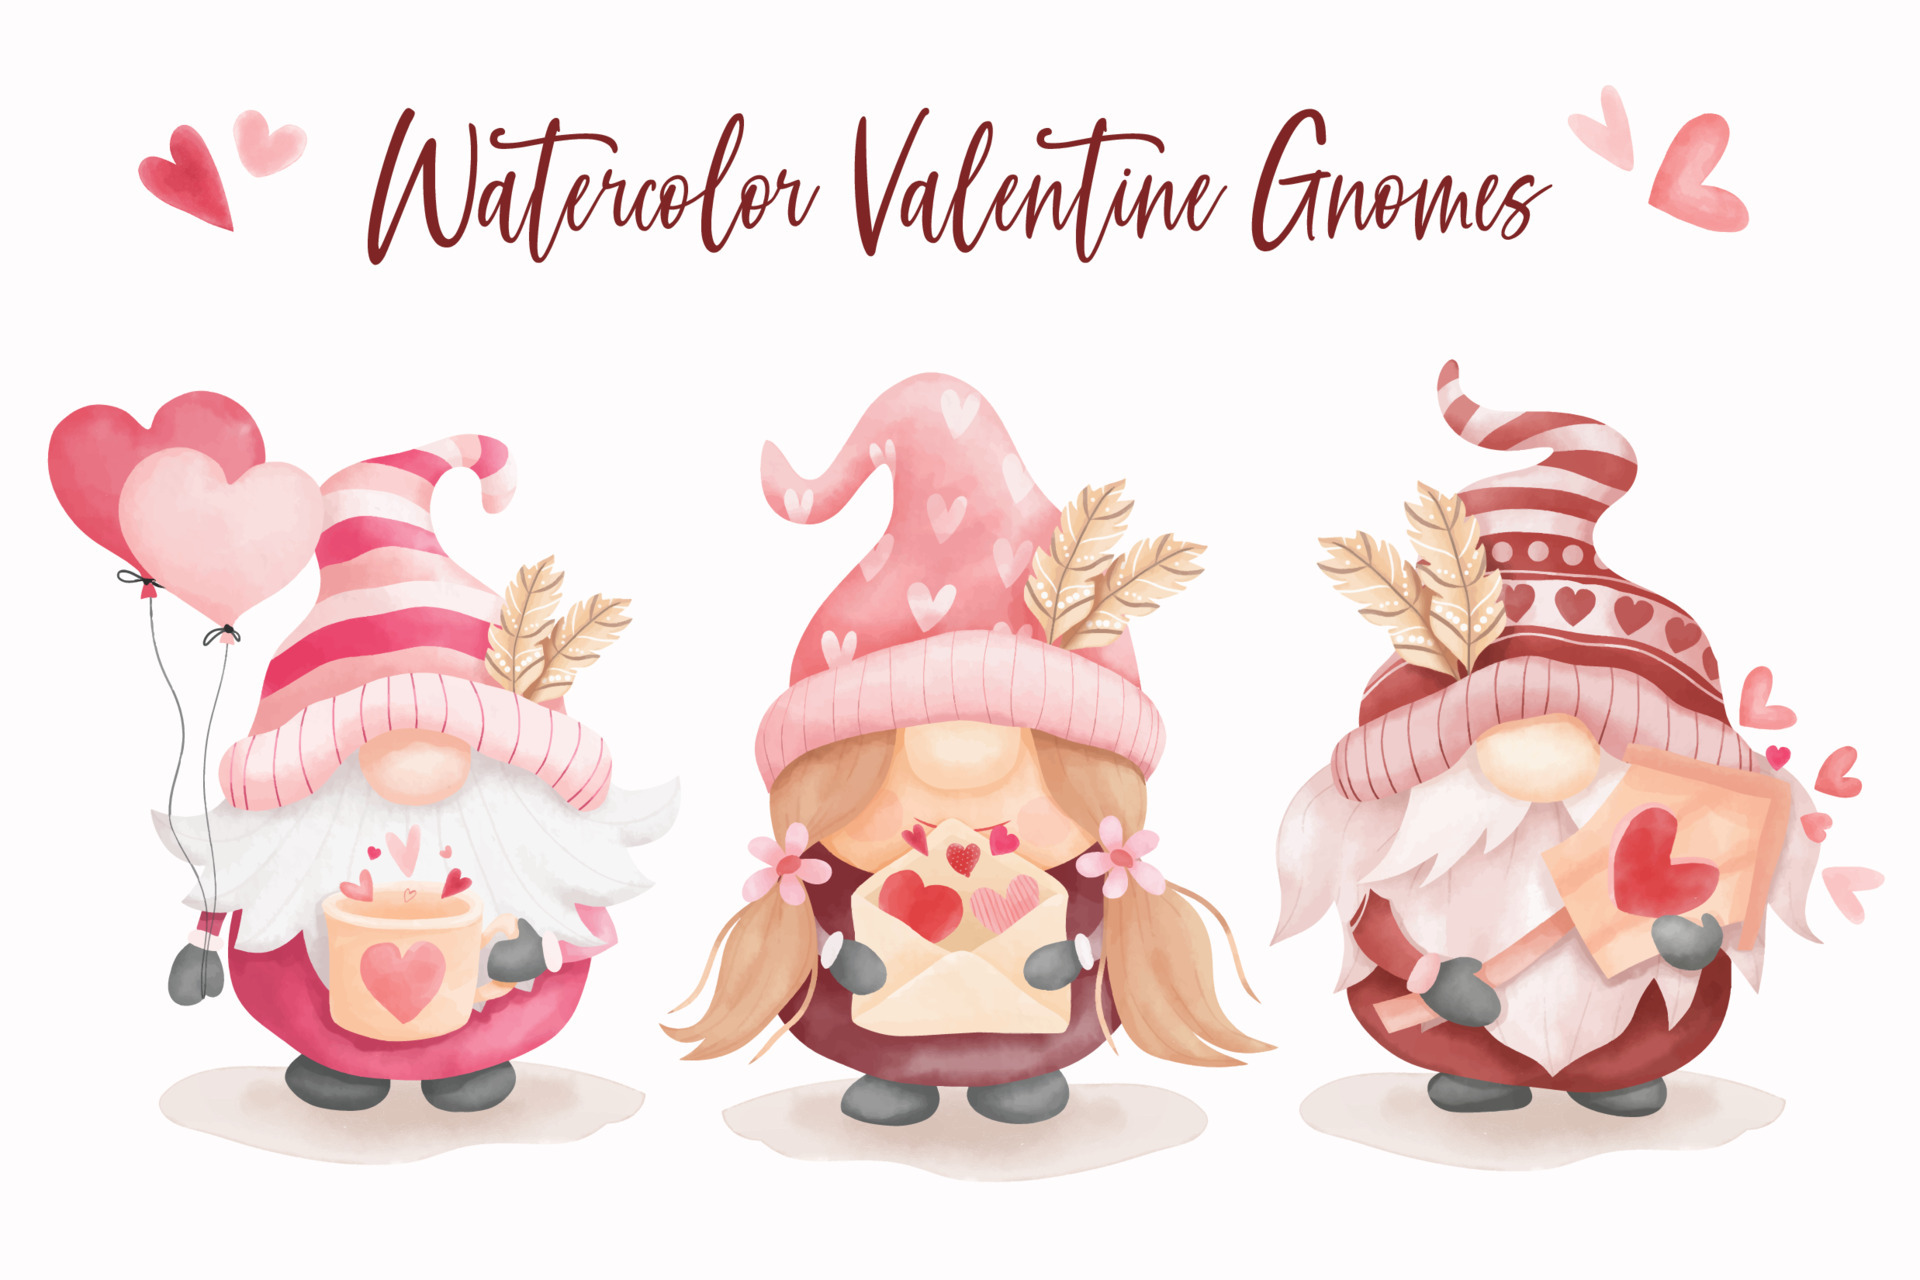 Valentines Day Gnome Fabric Wallpaper and Home Decor  Spoonflower